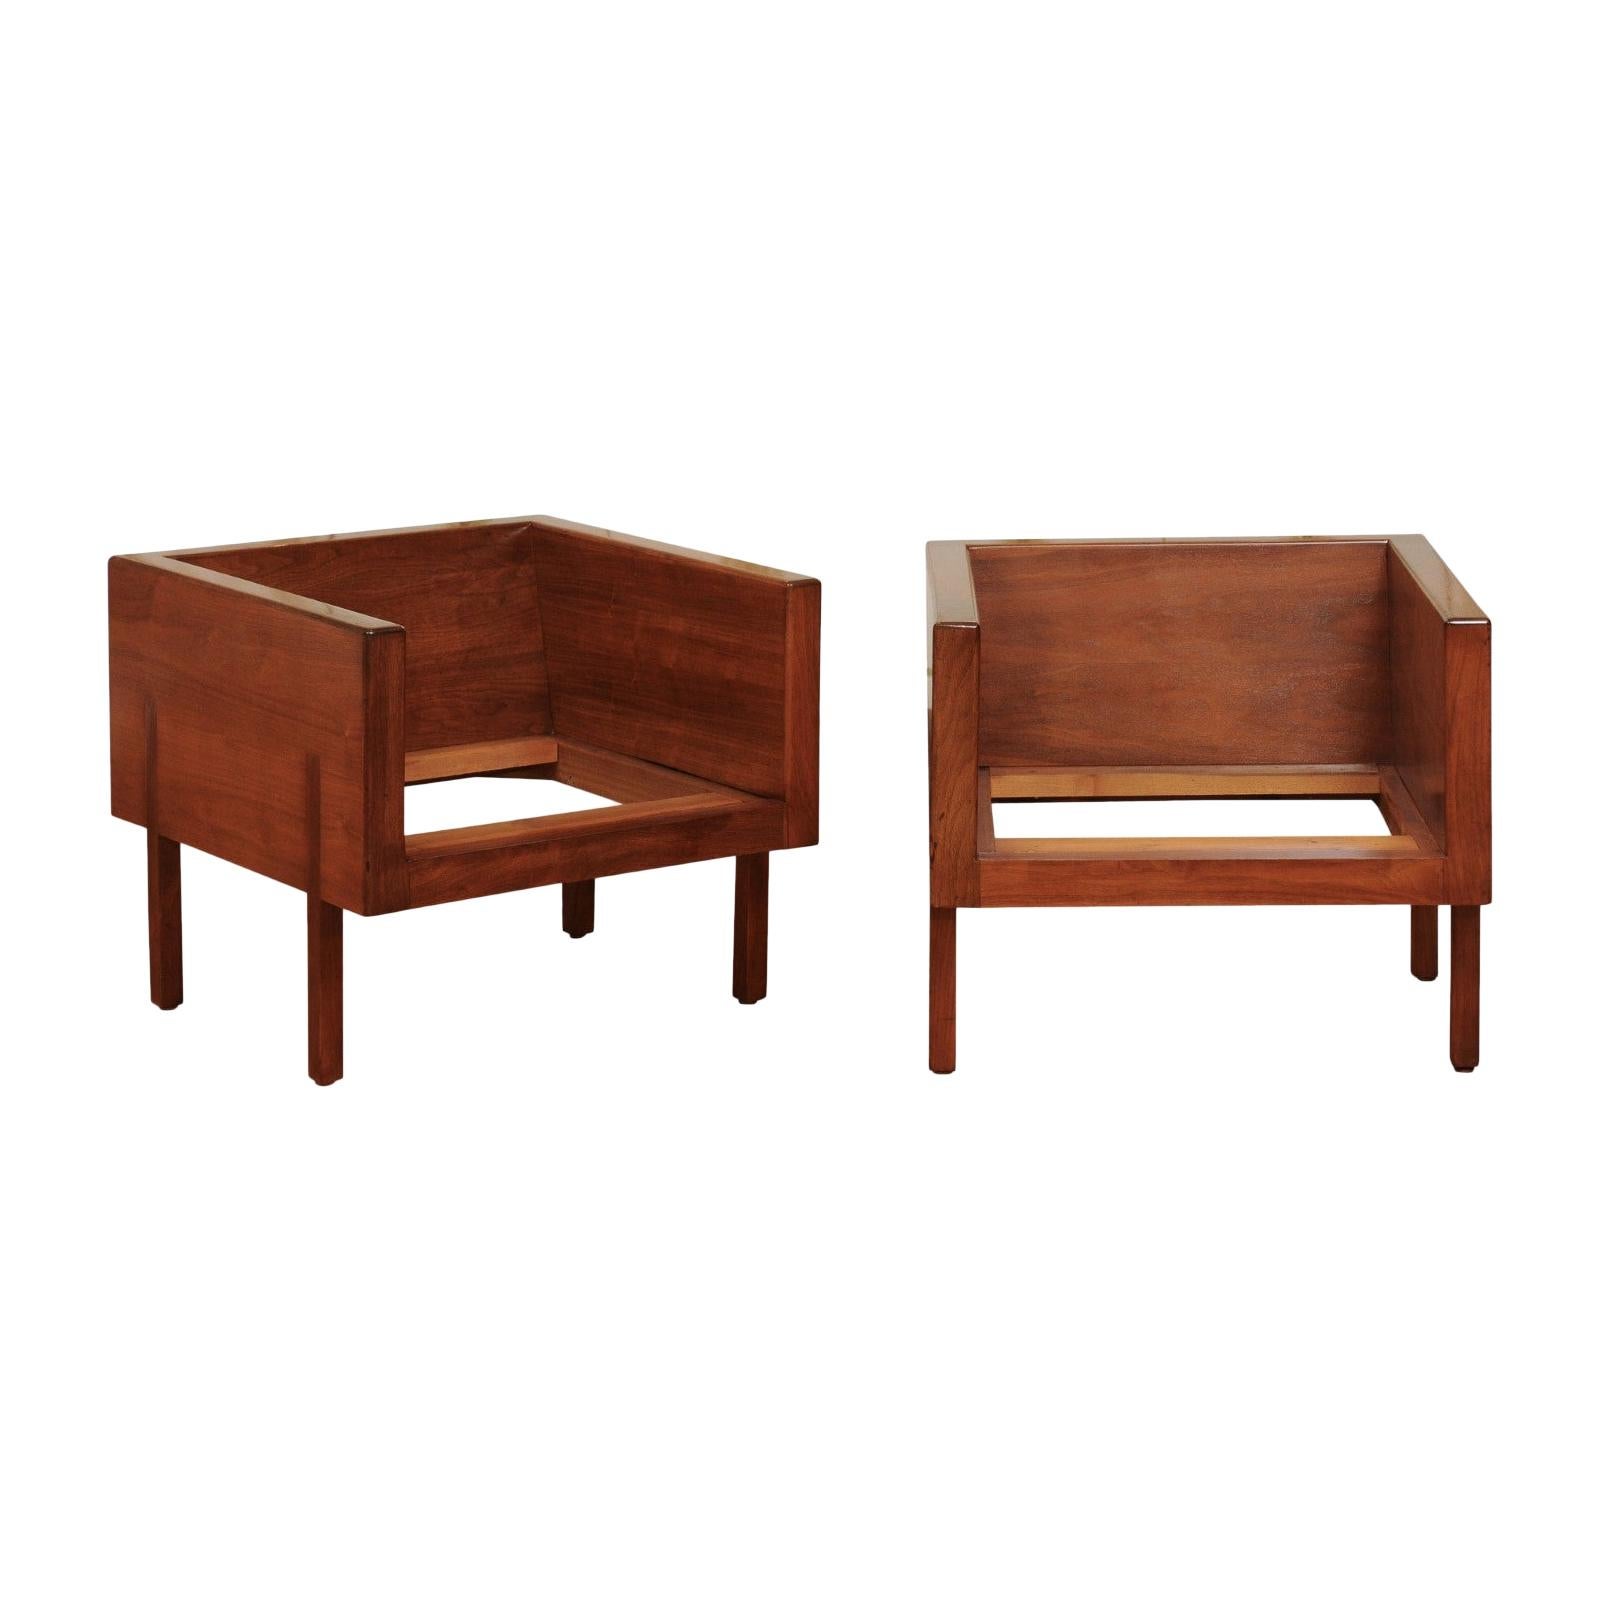 Extraordinary Pair of Walnut Cube Probber Style Loungers - 2 Pair